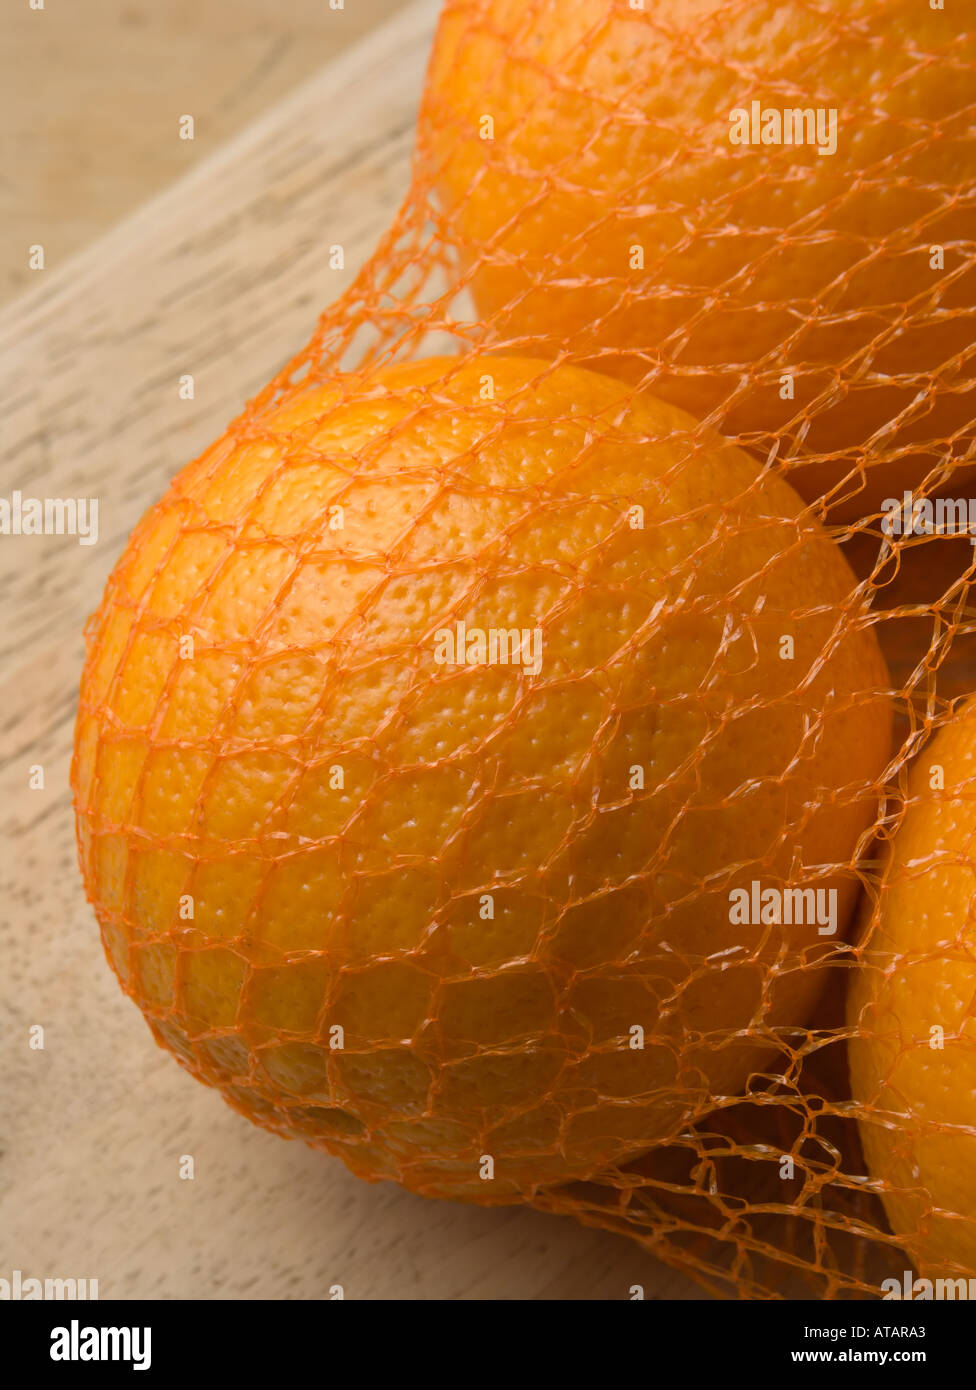 Oranges in net bag on wooden chopping board Stock Photo